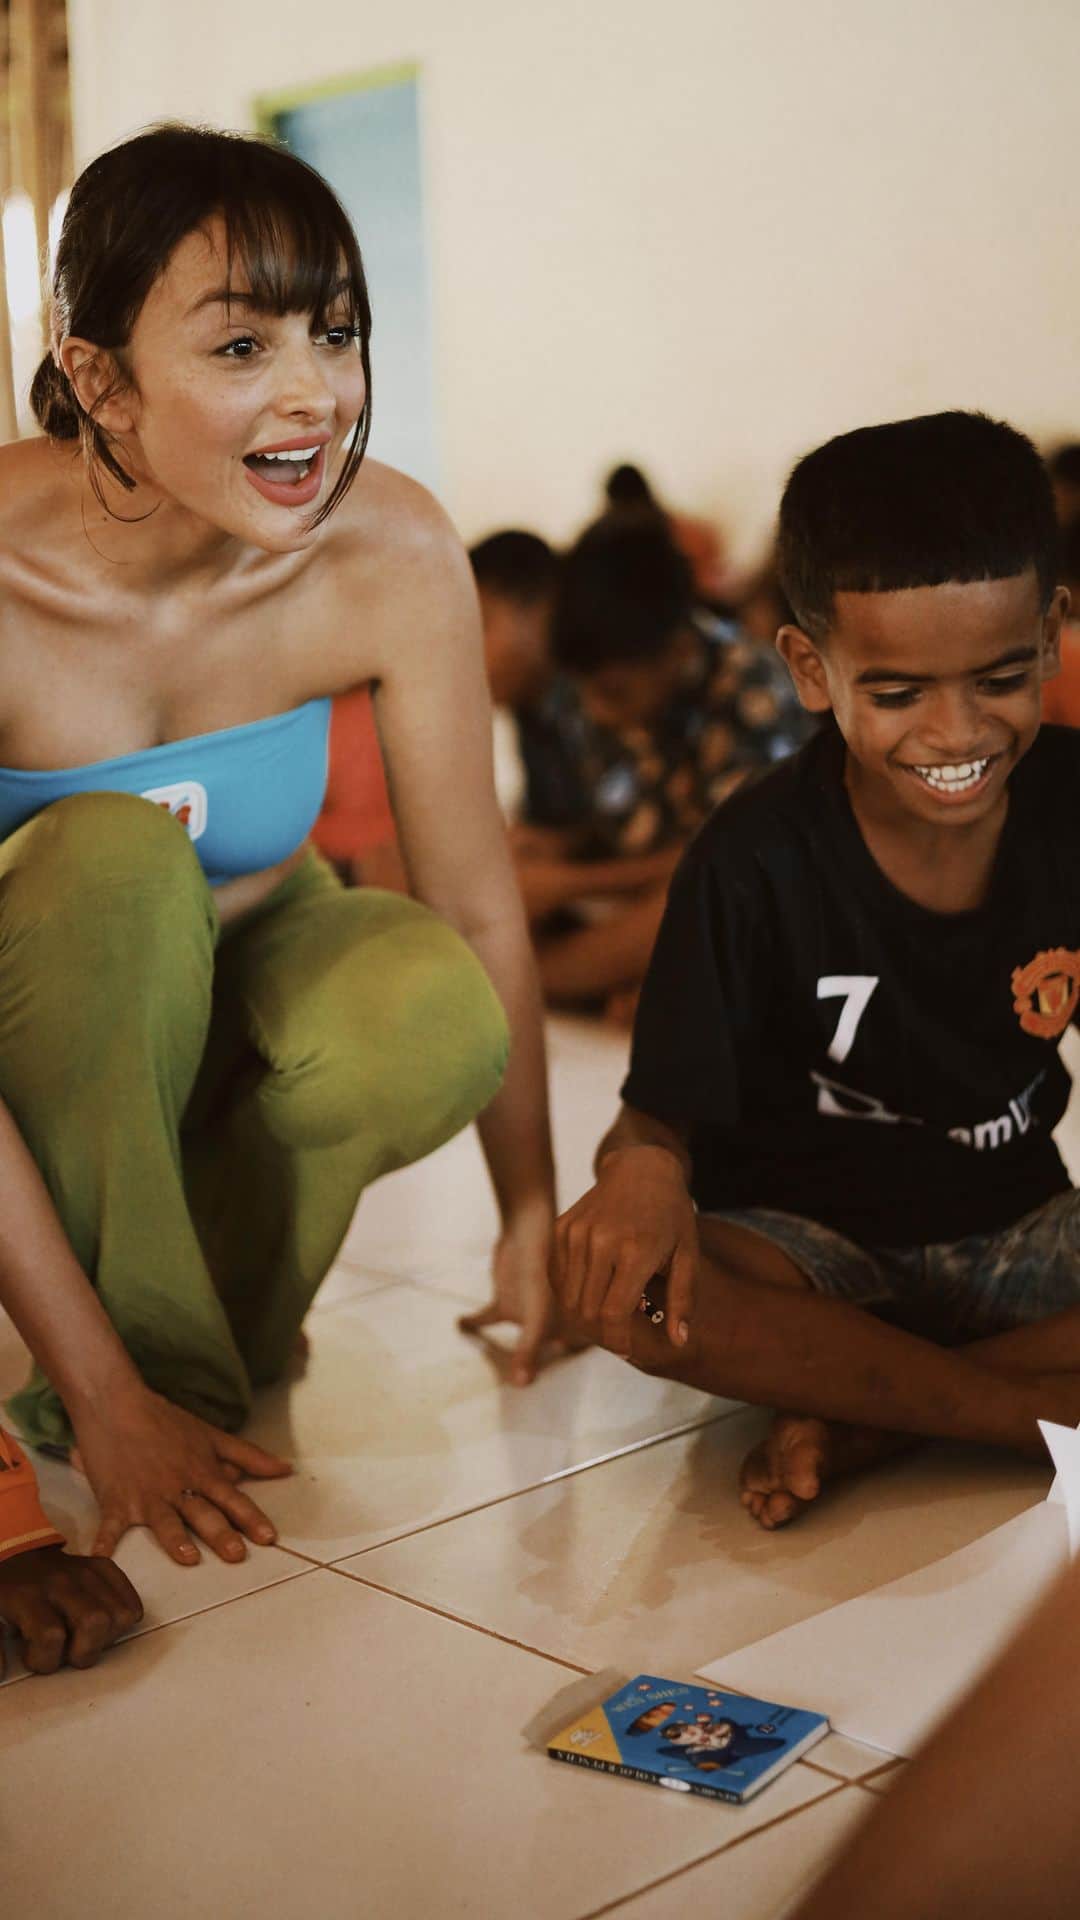 Irene Norenのインスタグラム：「The biggest joy of going to Sumba is to spend time with the kids at the @sumbafoundation @nihi. This year I had the opportunity to volunteer with an art class. Some of this kids walk for hours, often barefoot, to learn in school. This was our first drawing class and in this exercise I asked them to close their eyes and think about something that makes them happy, without thinking how it should look. The results were nature, animals, family. Hopefully, inspiring everyone to understand what really matters when it comes to real happiness. I can’t wait to come back and spend time with them 💗 if you guys are interested in learning more about this beautiful foundation, please check their page 🙏🏽 @sumbafoundation and @nihi thank you for letting me enjoy and share this experience」